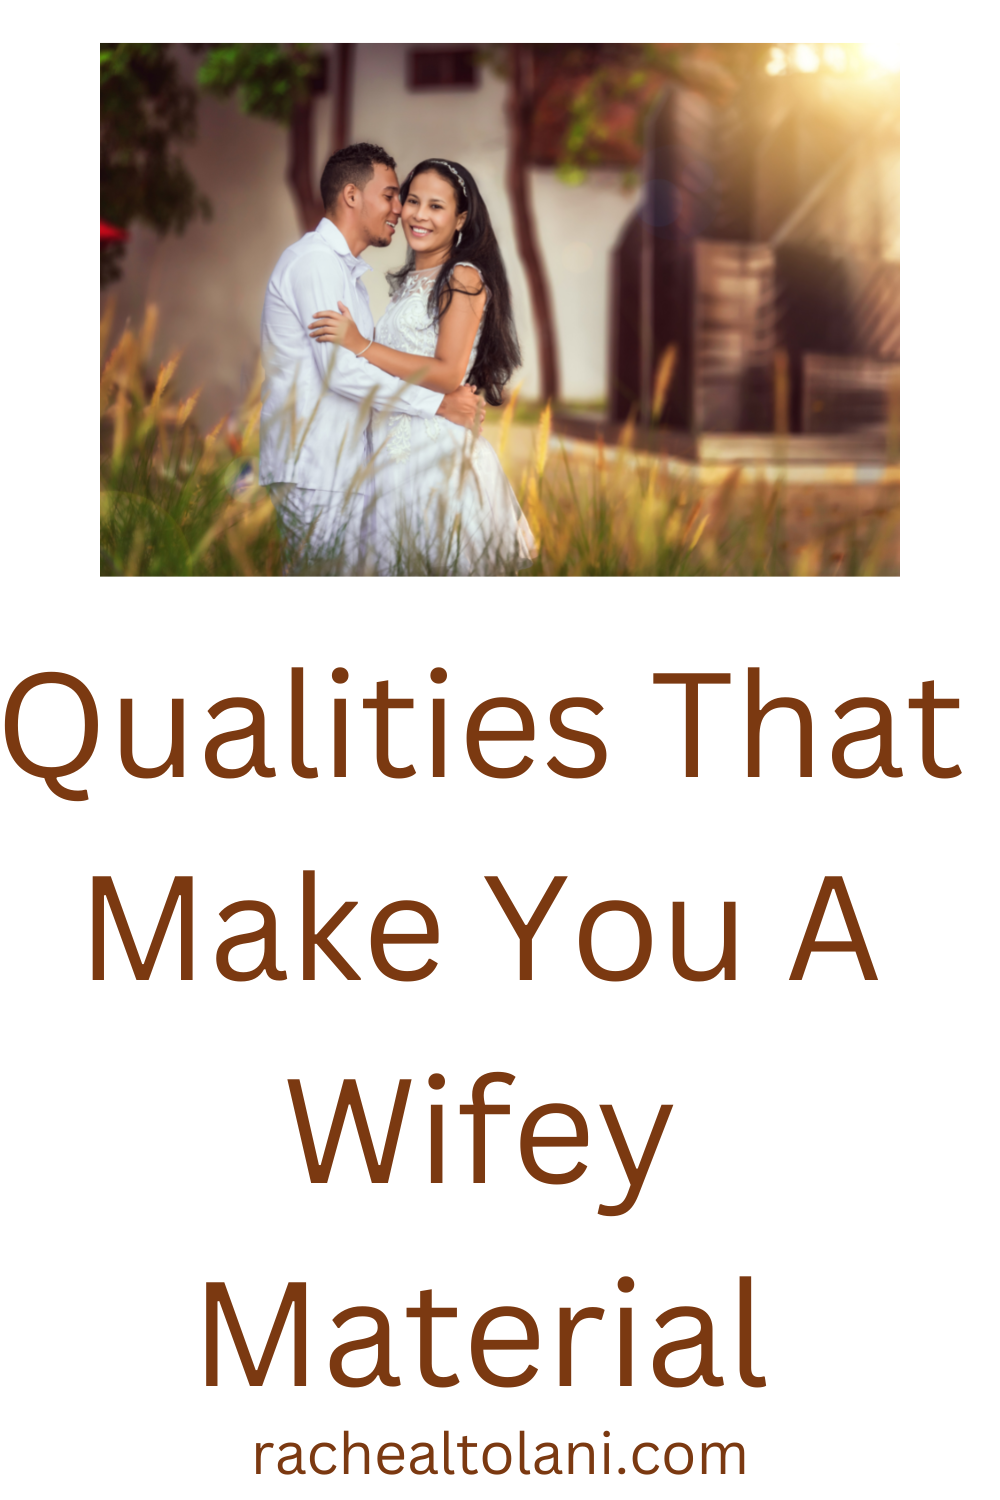 Qualities that make you a wifey material